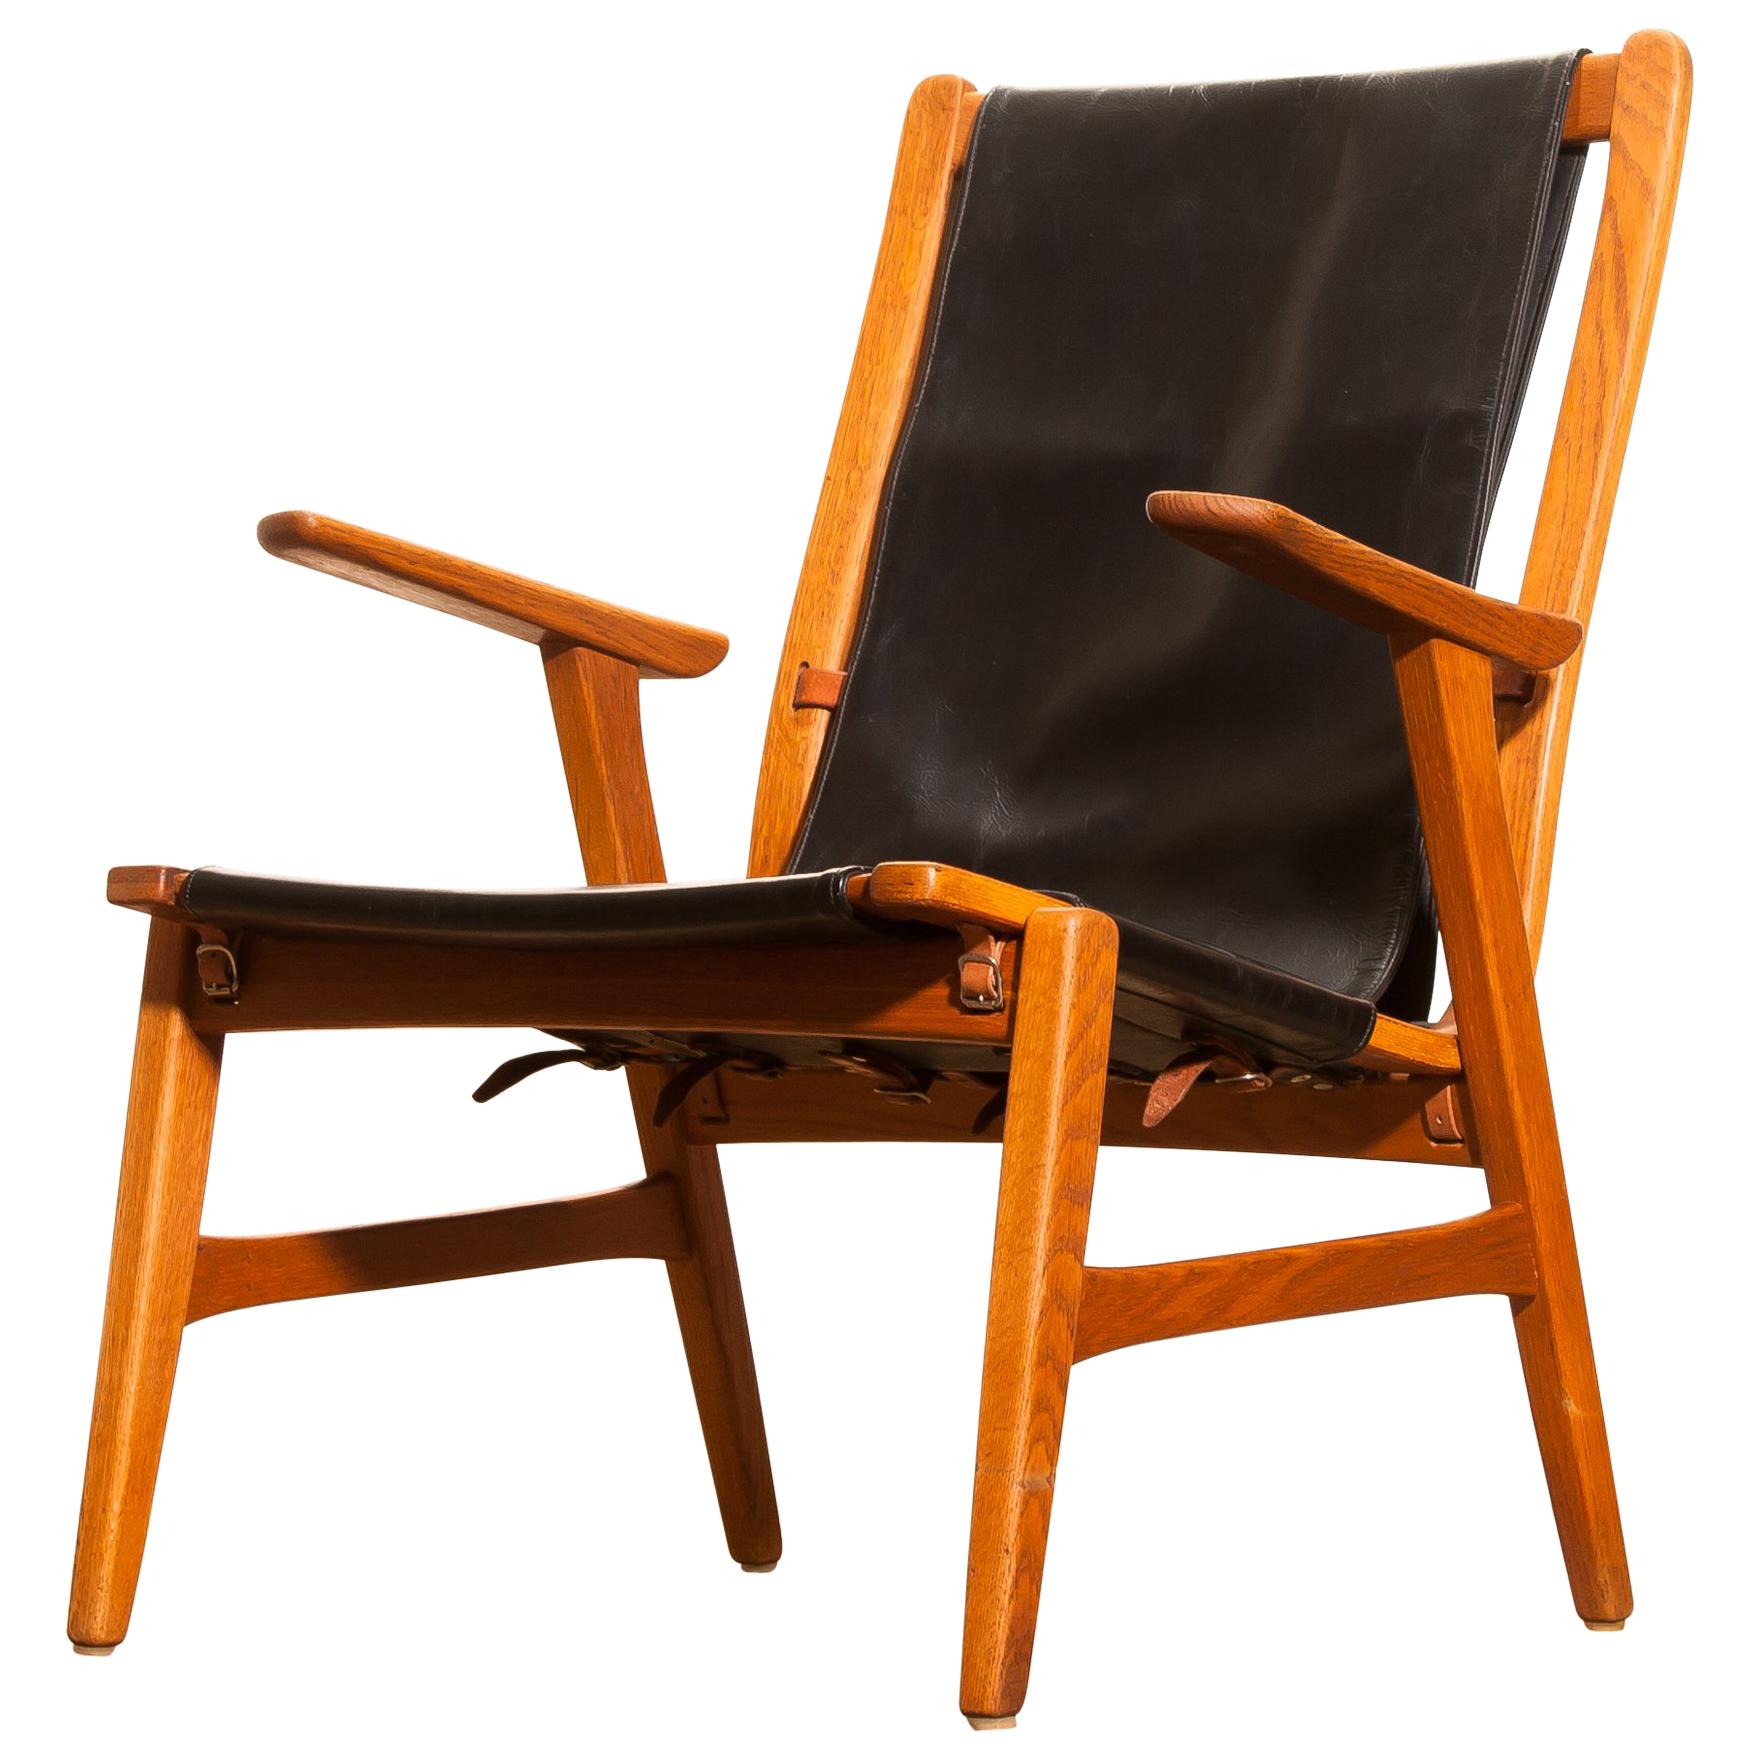 Wonderful hunting chair 'Ulrika' designed by Östen Kristansson for Vittsjö, Sweden.
This beautiful chair is made of an oak frame with a black leatherette seating.
It is in very nice condition,
Period 1950s.
Dimensions: H 82 cm, W 62 cm, D 60 cm,